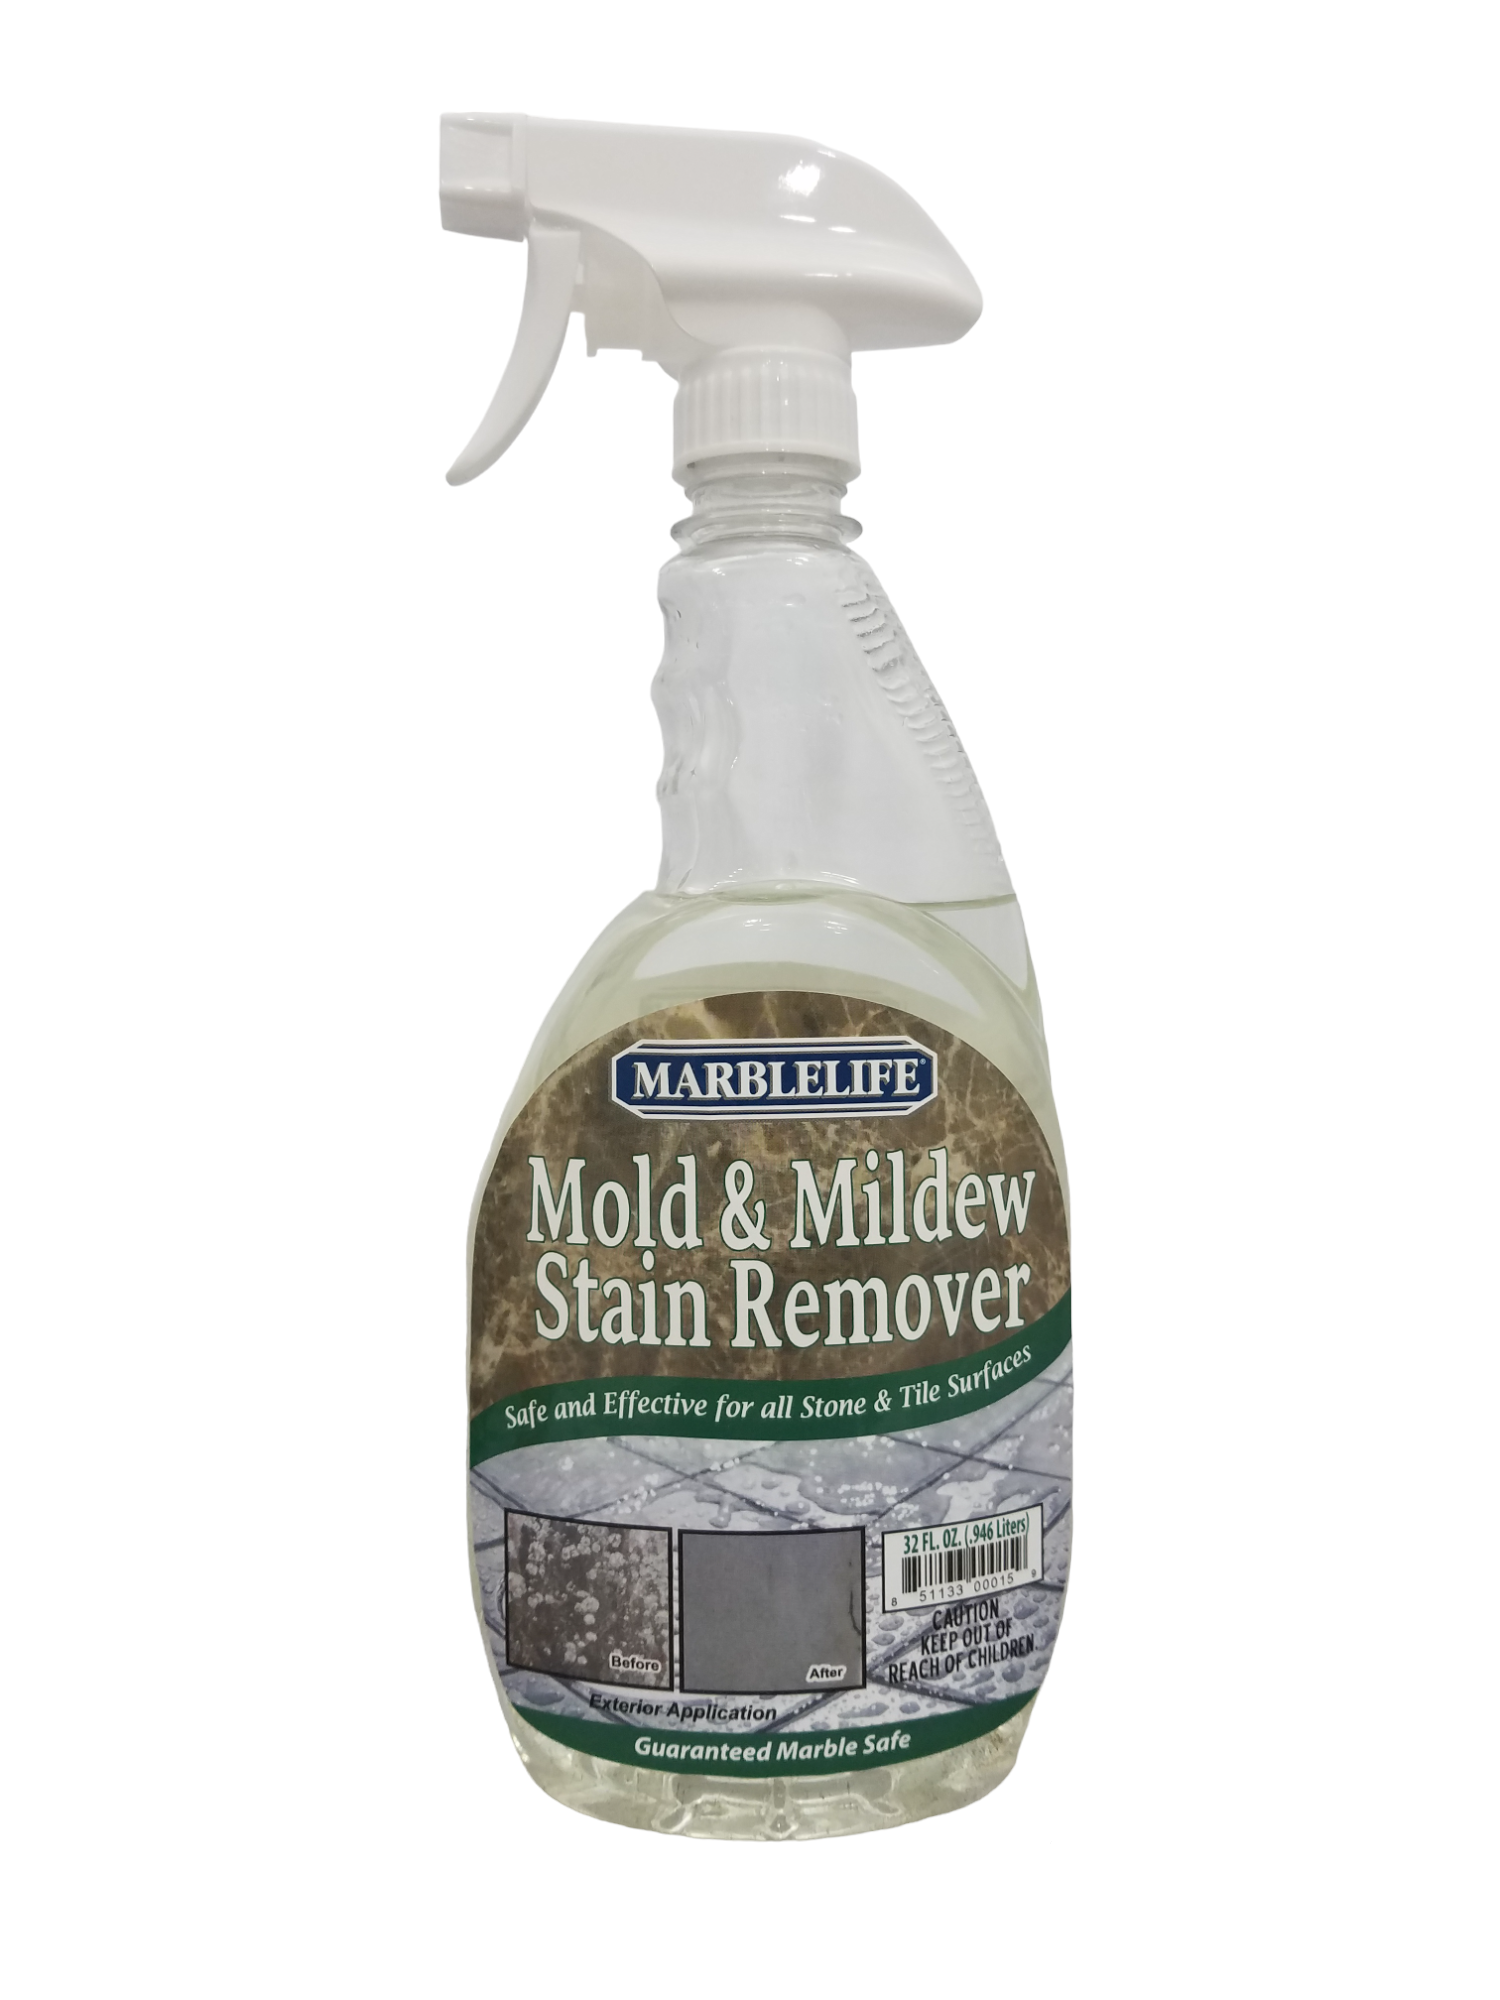 MARBLELIFE Mold & Mildew Stain Remover Spray 32 oz. 